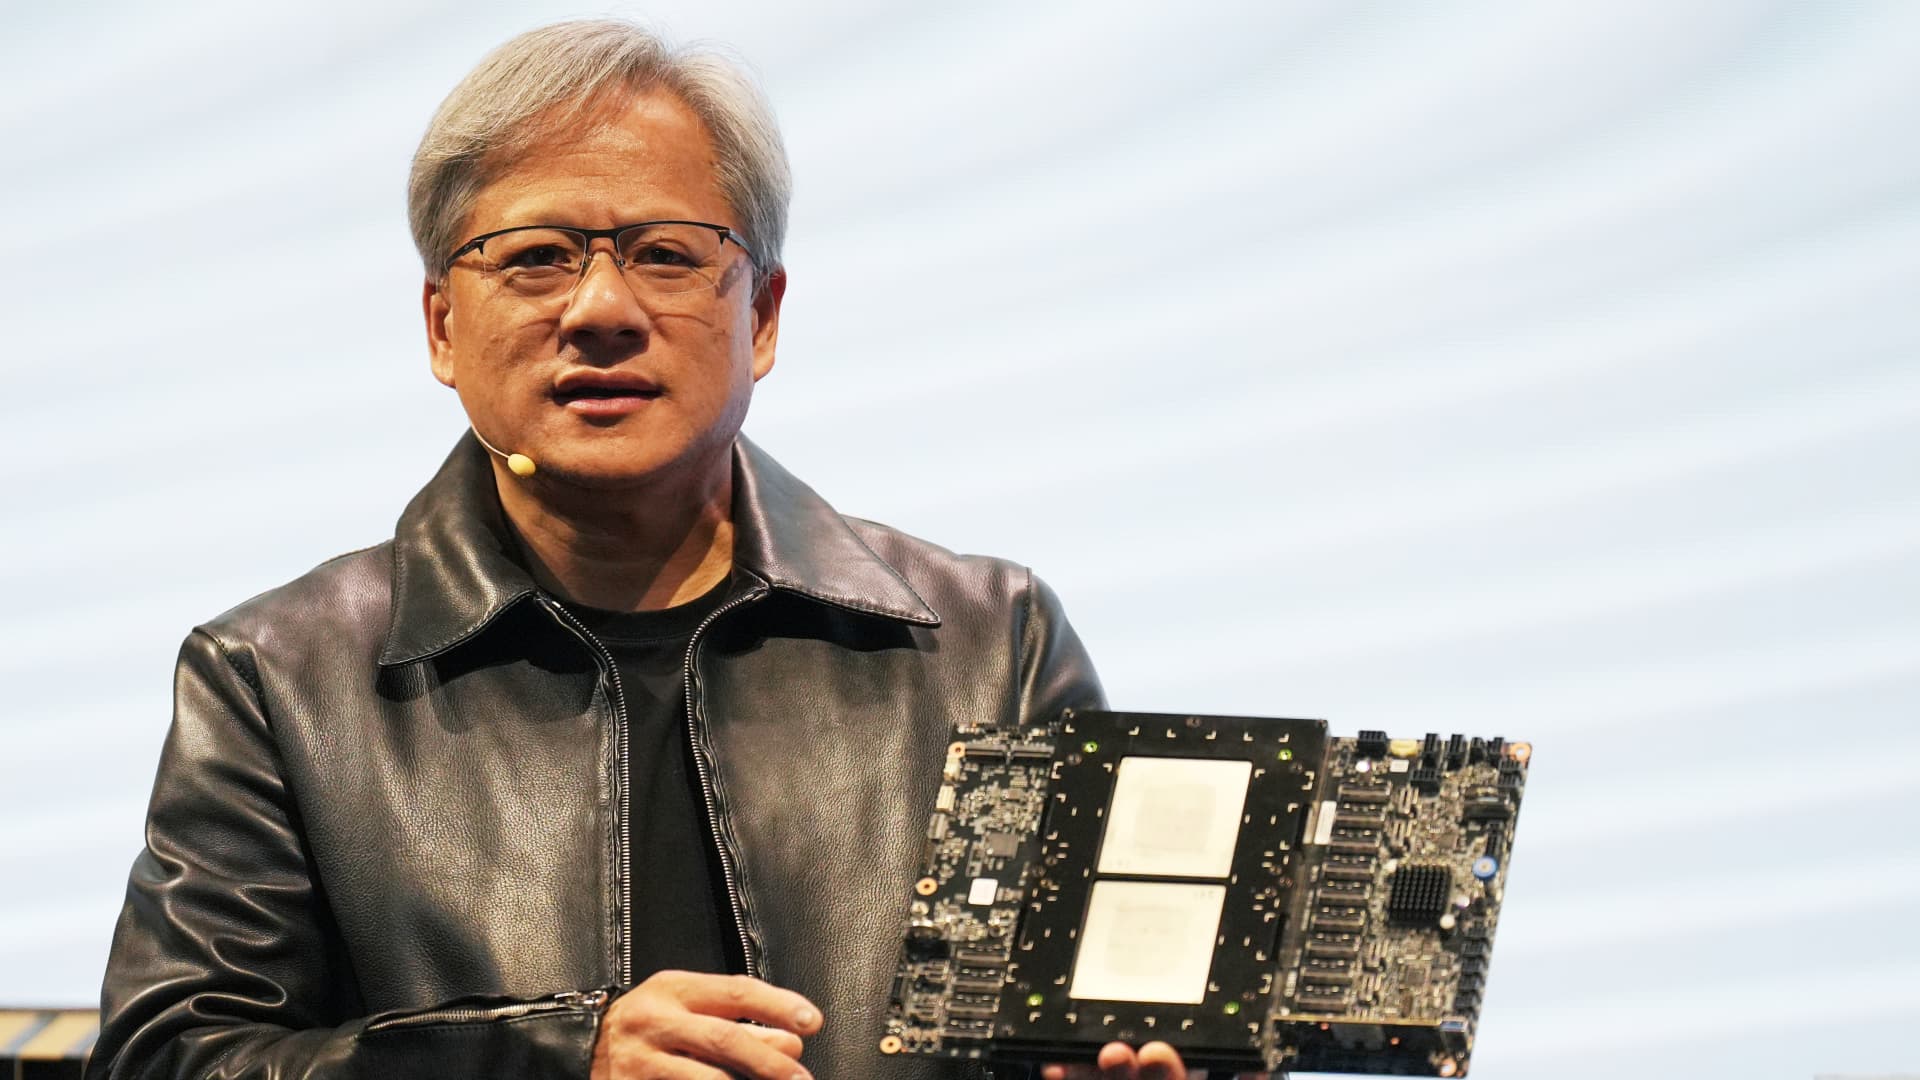 Jensen Huang started Nvidia at a Denny’s breakfast booth [Video]